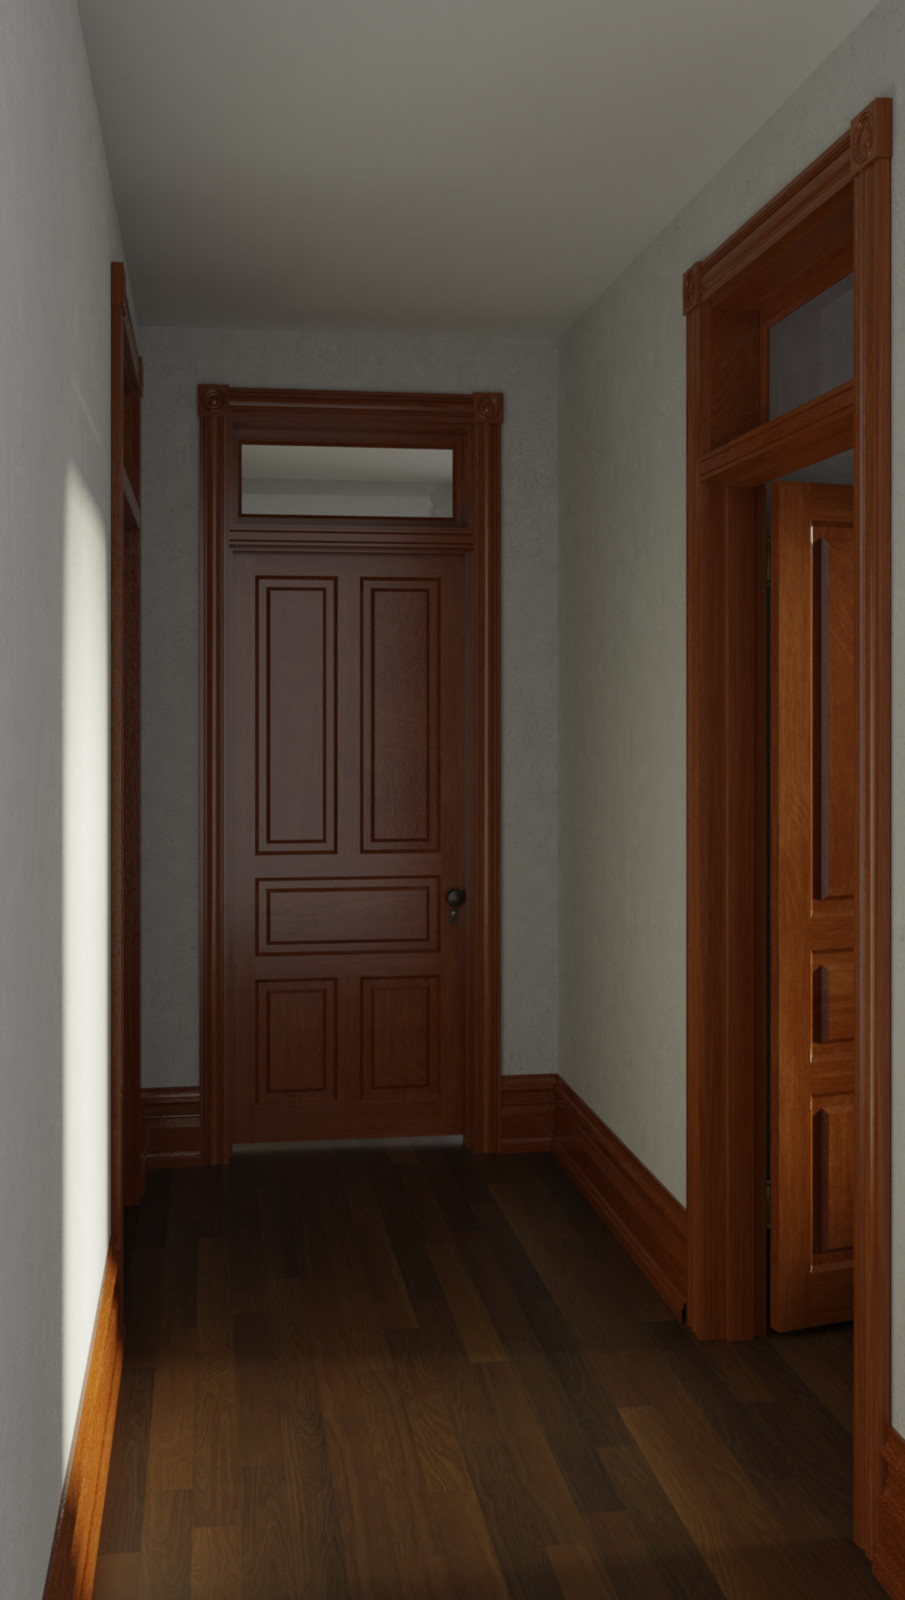 Another scene modeled after my own home. The second floor hall.